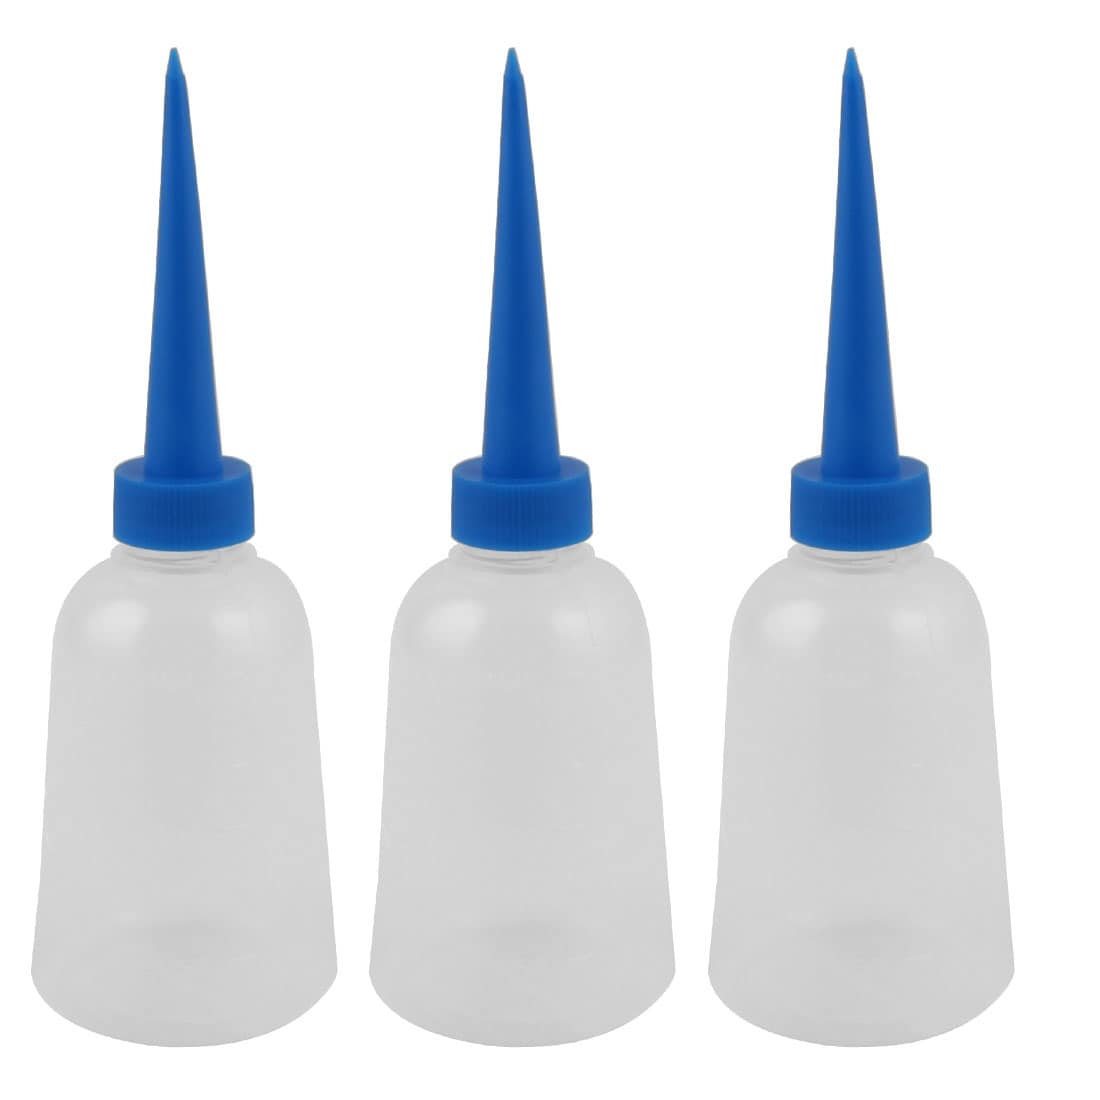 150ml Industry Pointy Nozzle Sewing Machine Oil Squeeze Bottle 3pcs - 2.2 x 6.6(Max.D*H) - Blue,Clear White